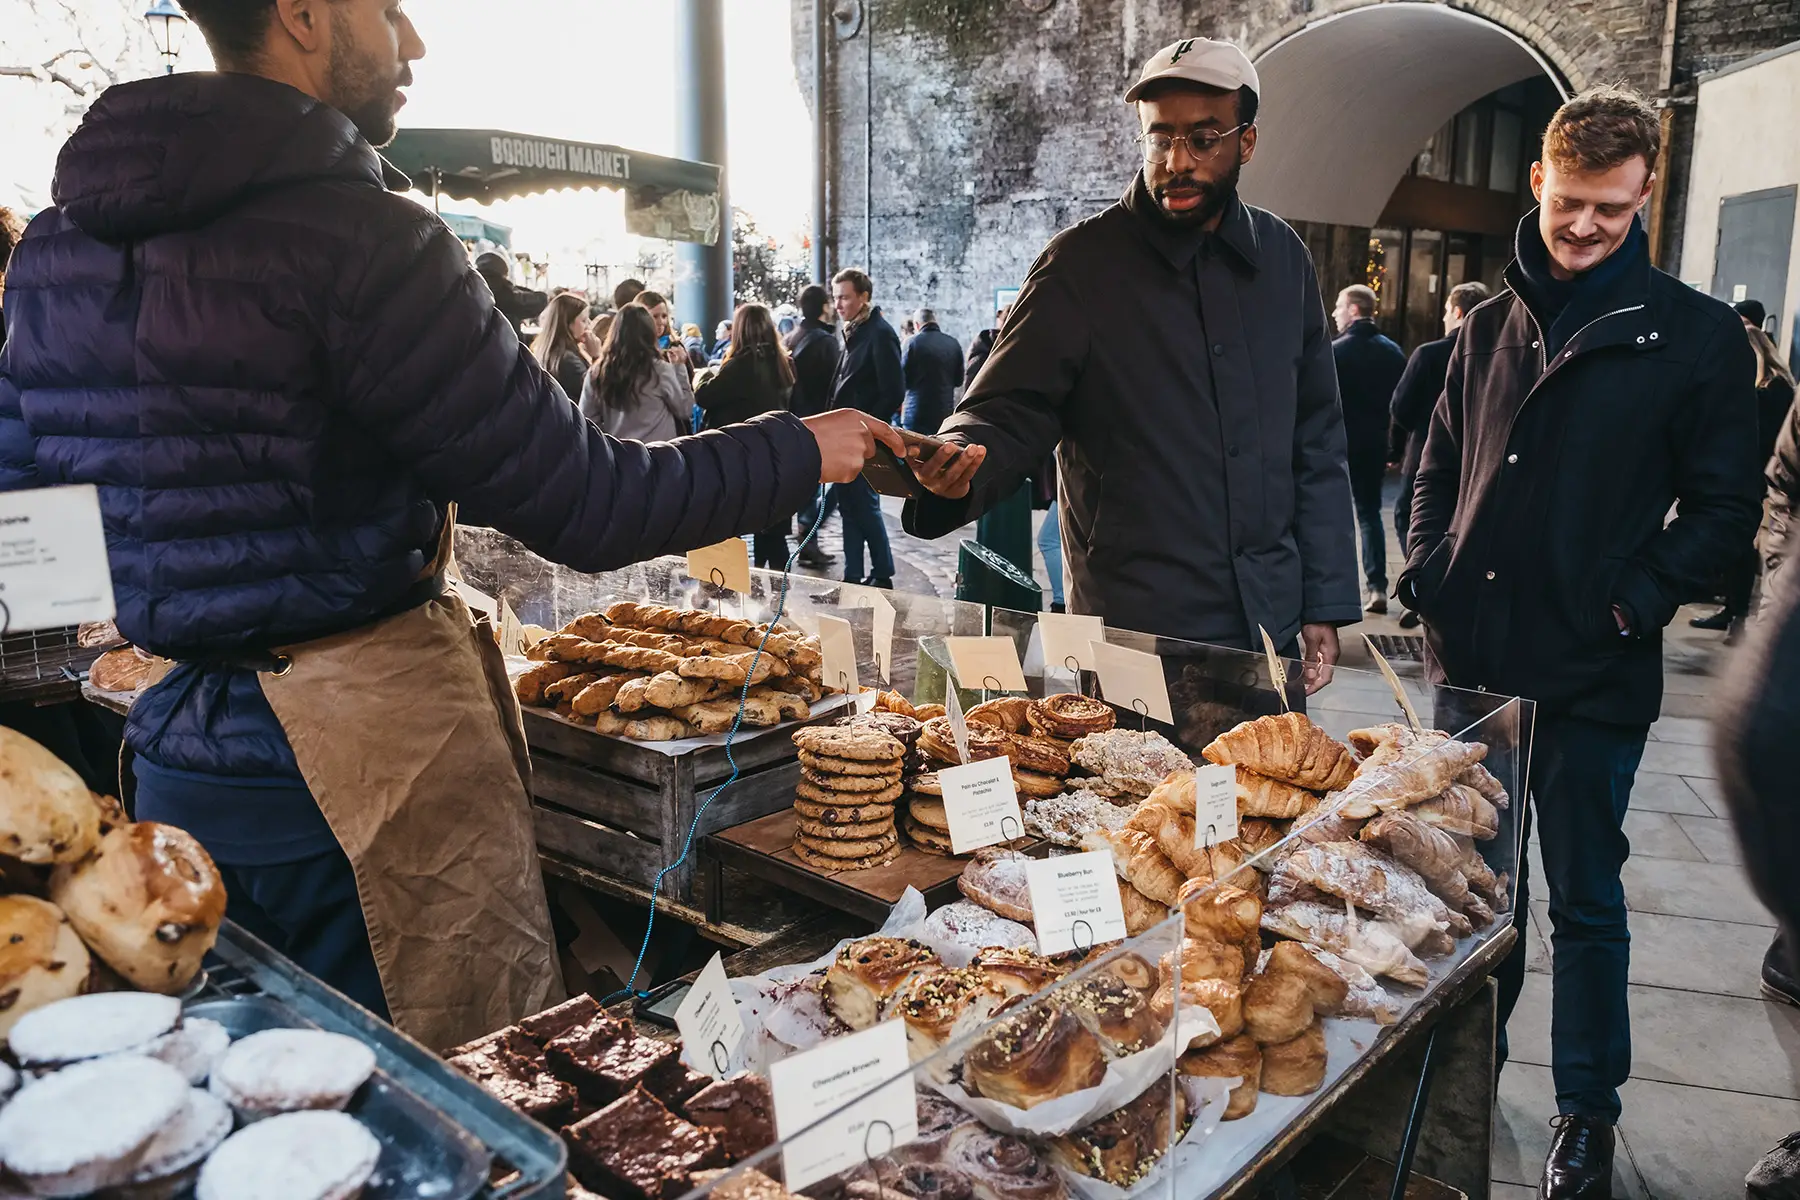 A man makes a payment with his mobile phone at a market in London